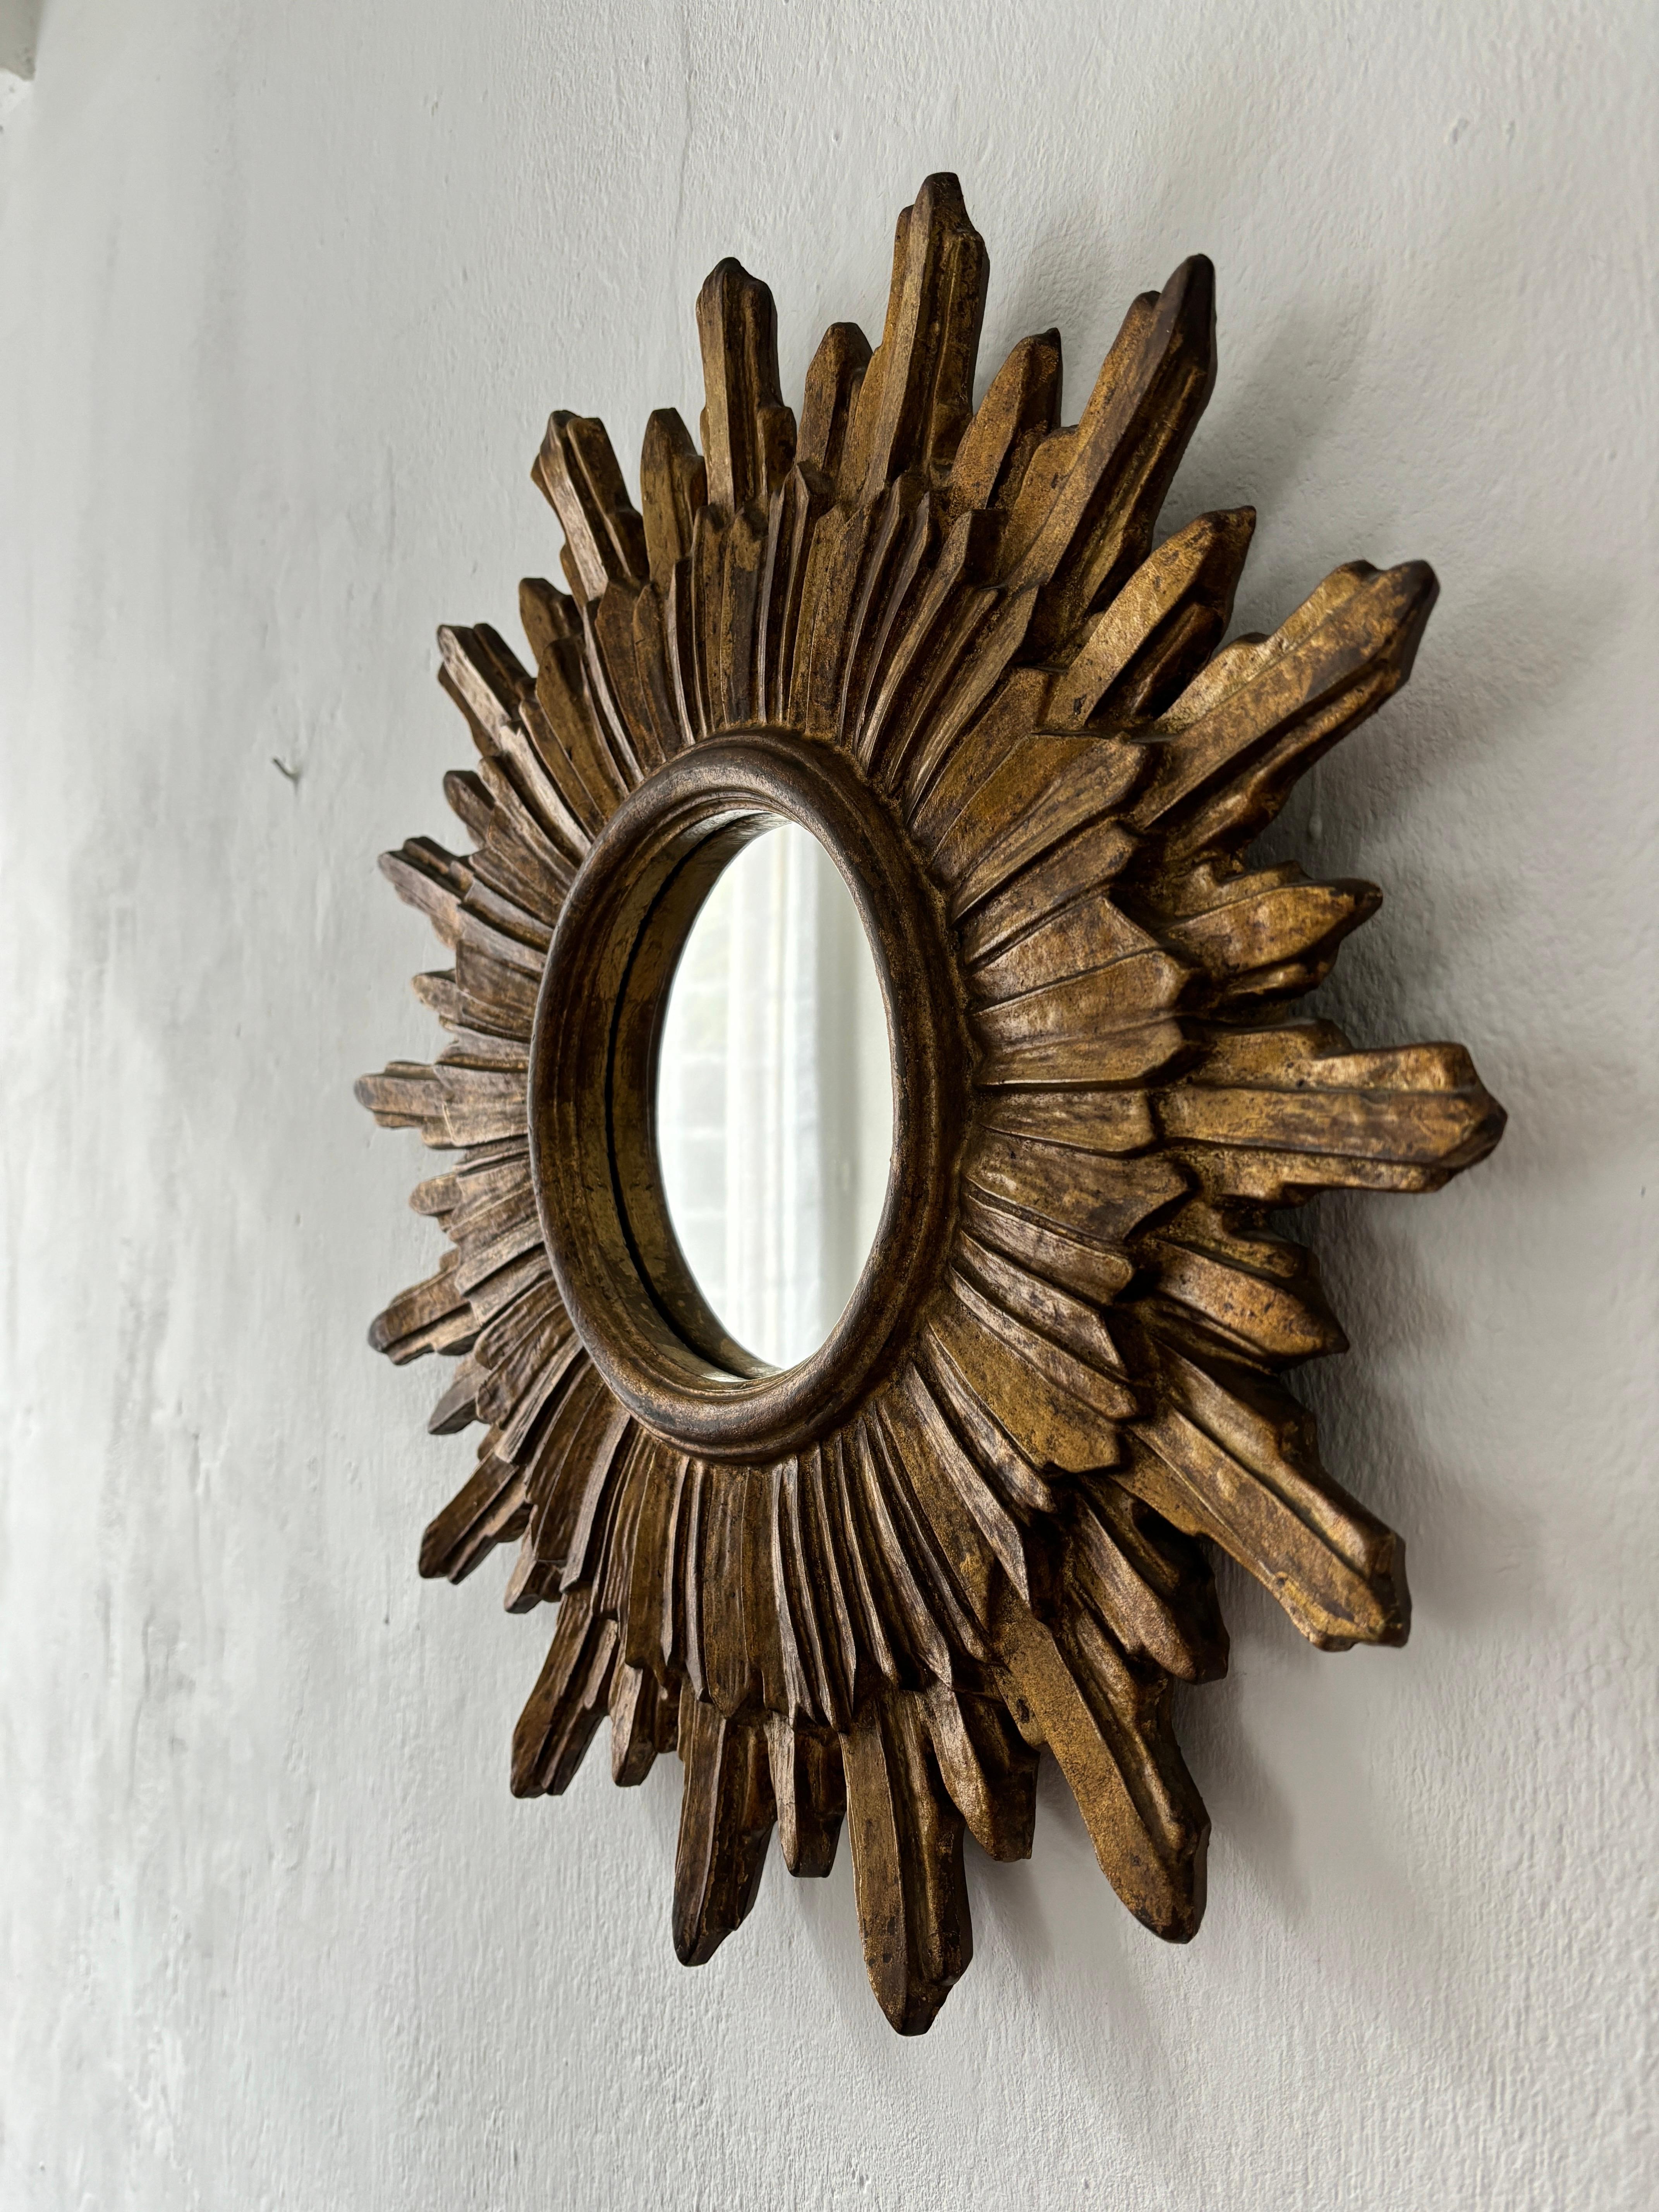 Beautiful big French double wood gold starburst. Amazing patina. Gold wood with mirror in perfect shape. Mirror itself measures 6.5 inches round. Original felt backing, small hole as shown.  Free priority UPS shipping from Italy, no custom fees.